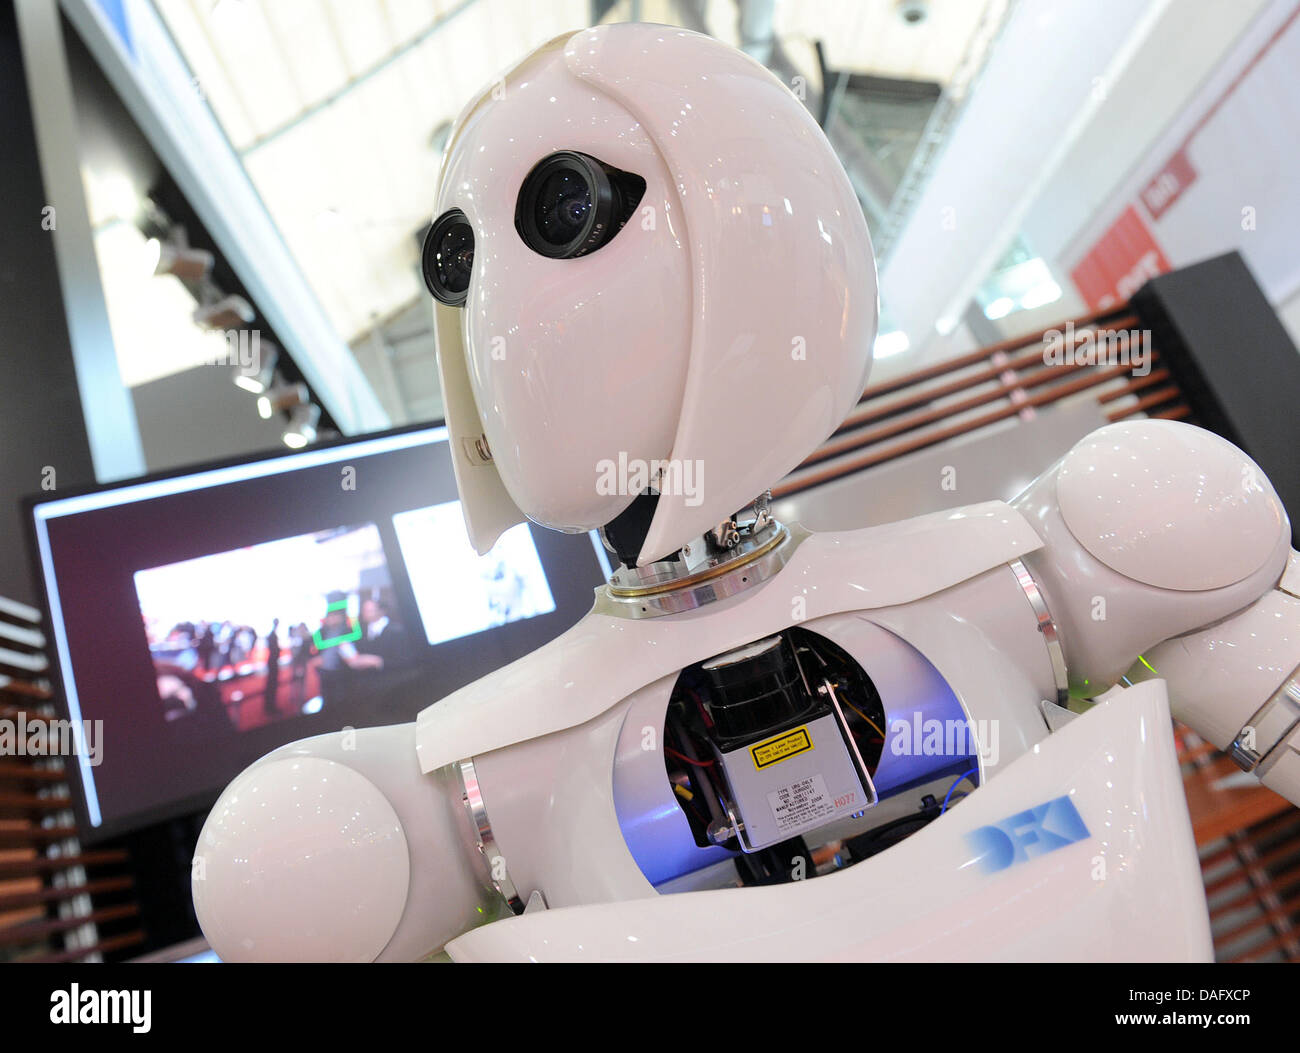 The robot AILA is pictured at the international computer fair CeBIT 2011 in Hanover, Germany, 04 March 2011. The robot can transport many differently shaped objects. More than 4200 companies from 70 countires present their newest products from the 1-5 March 2011 in Hanover. Photo: Caroline Seidel Stock Photo